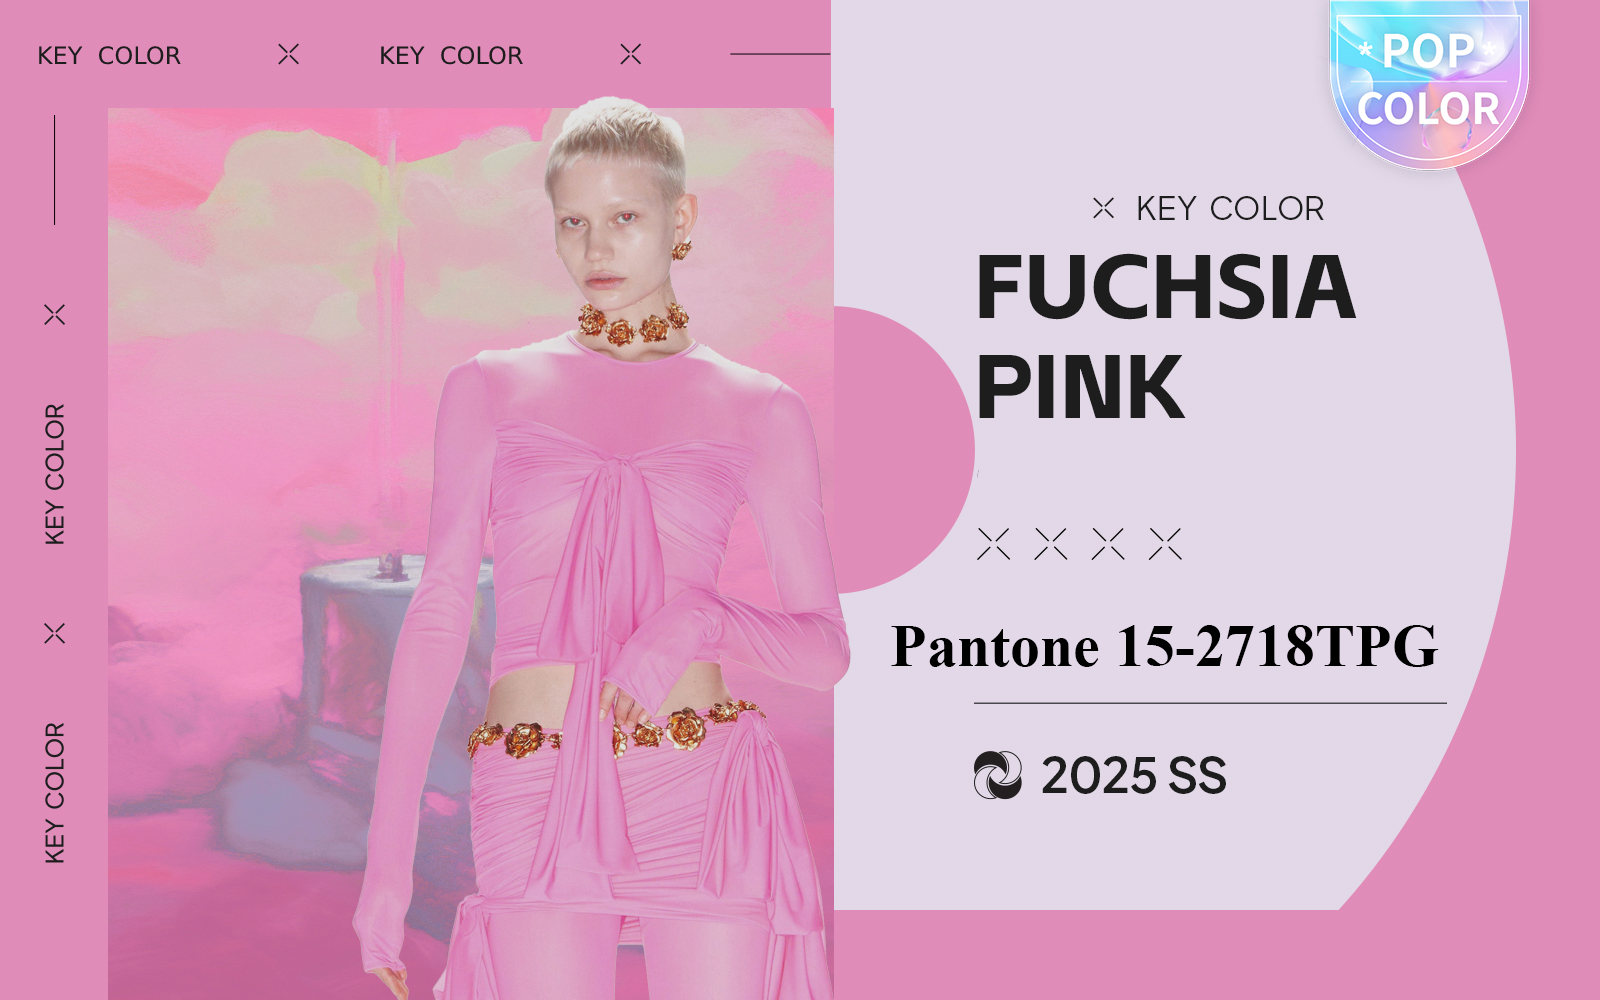 Fuchsia Pink -- The Color Trend for Womenswear